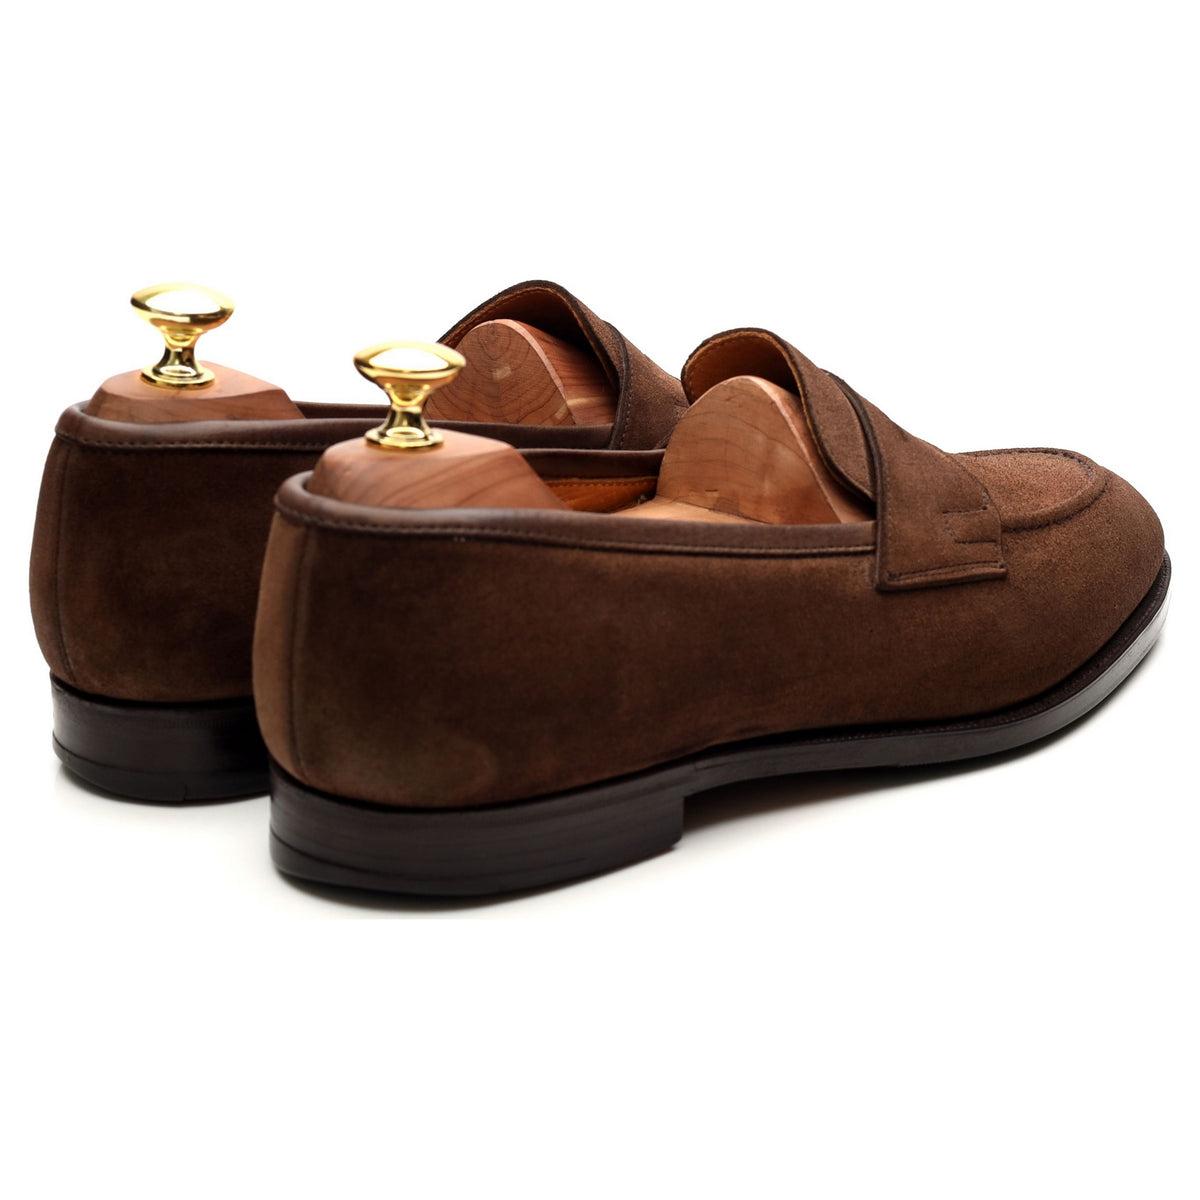 Brown Suede Loafers UK 8 E US 8.5 D